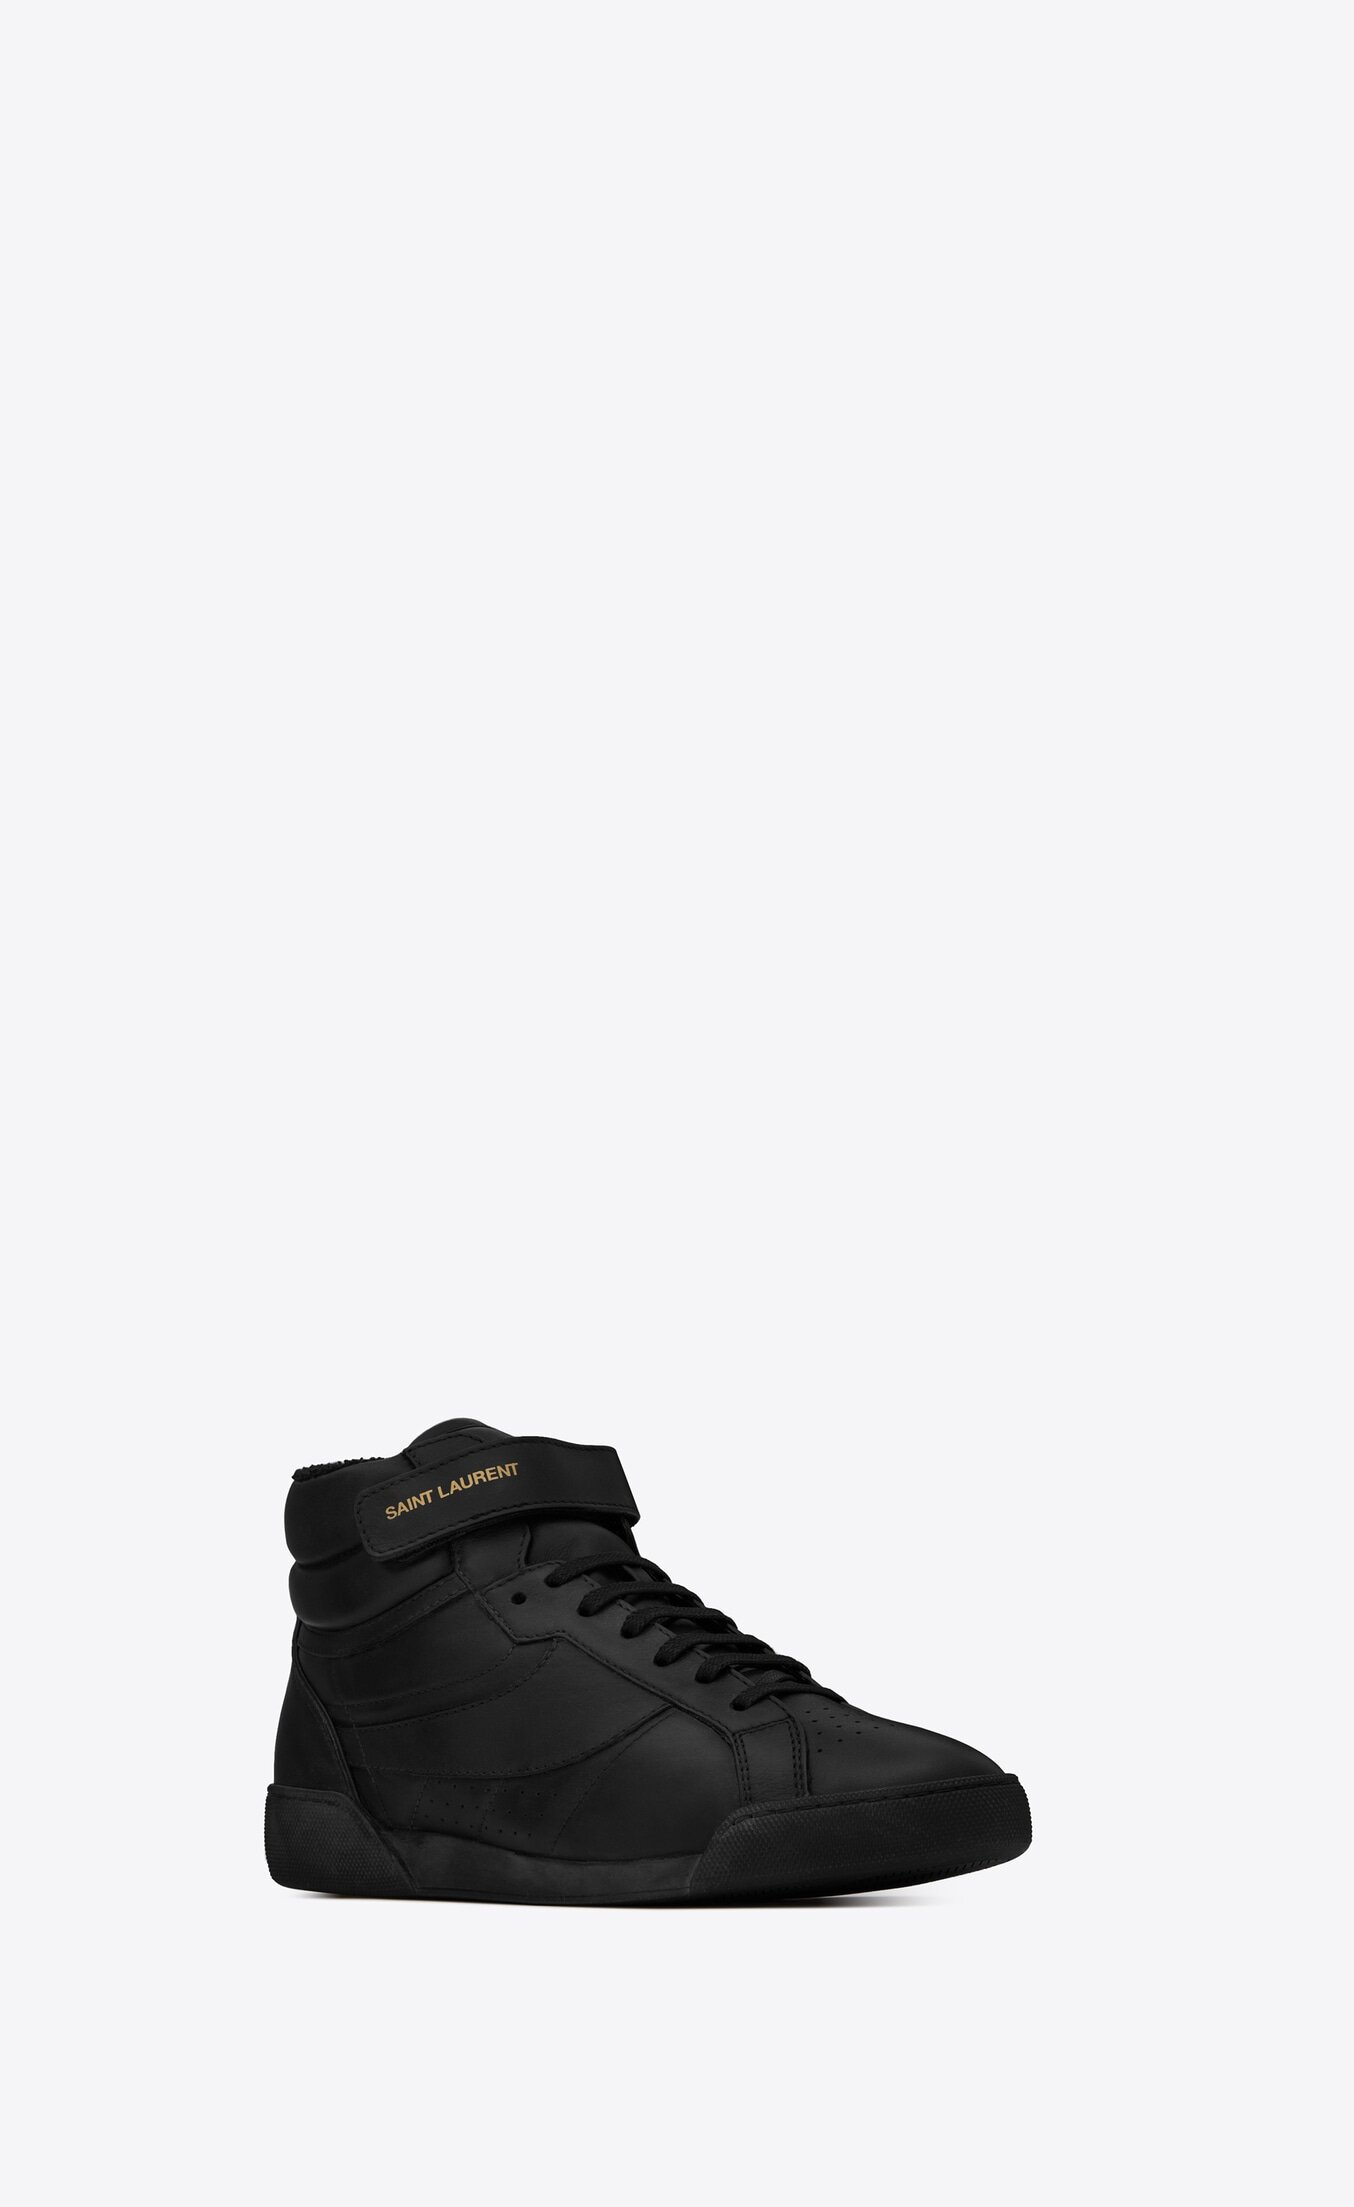 Saint Laurent Lenny Sneakers in Black Leather — UFO No More